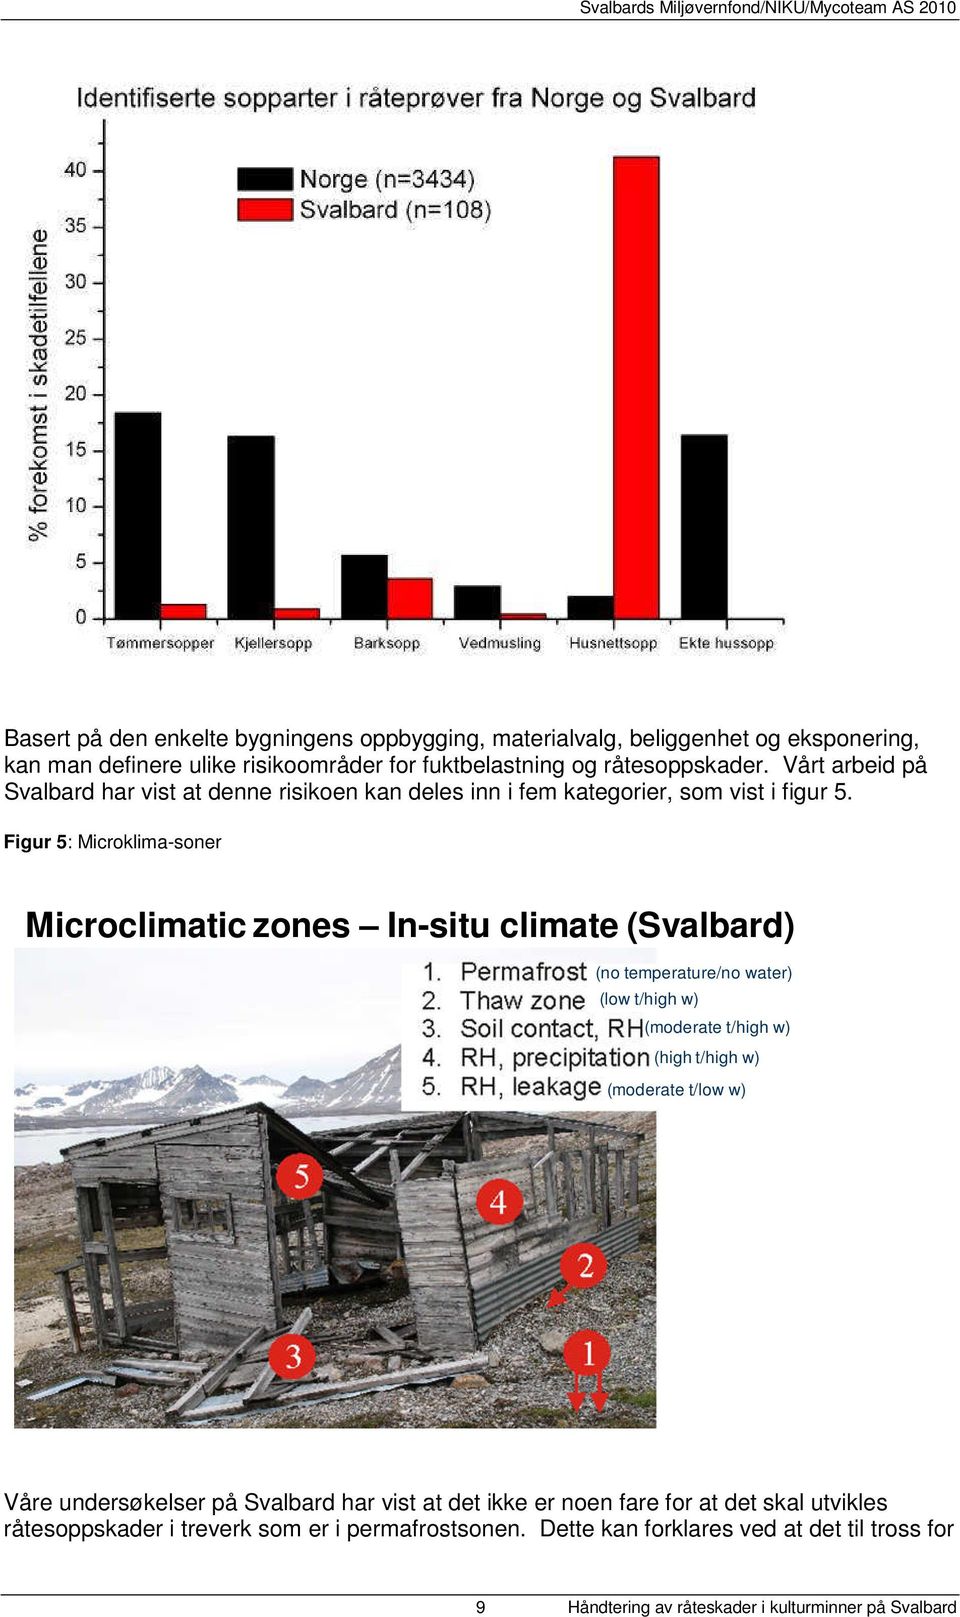 Figur 5: Microklima-soner Microclimatic zones In-situ climate (Svalbard) (no temperature/no water) (low t/high w) (moderate t/high w) (high t/high w) (moderate t/low w)